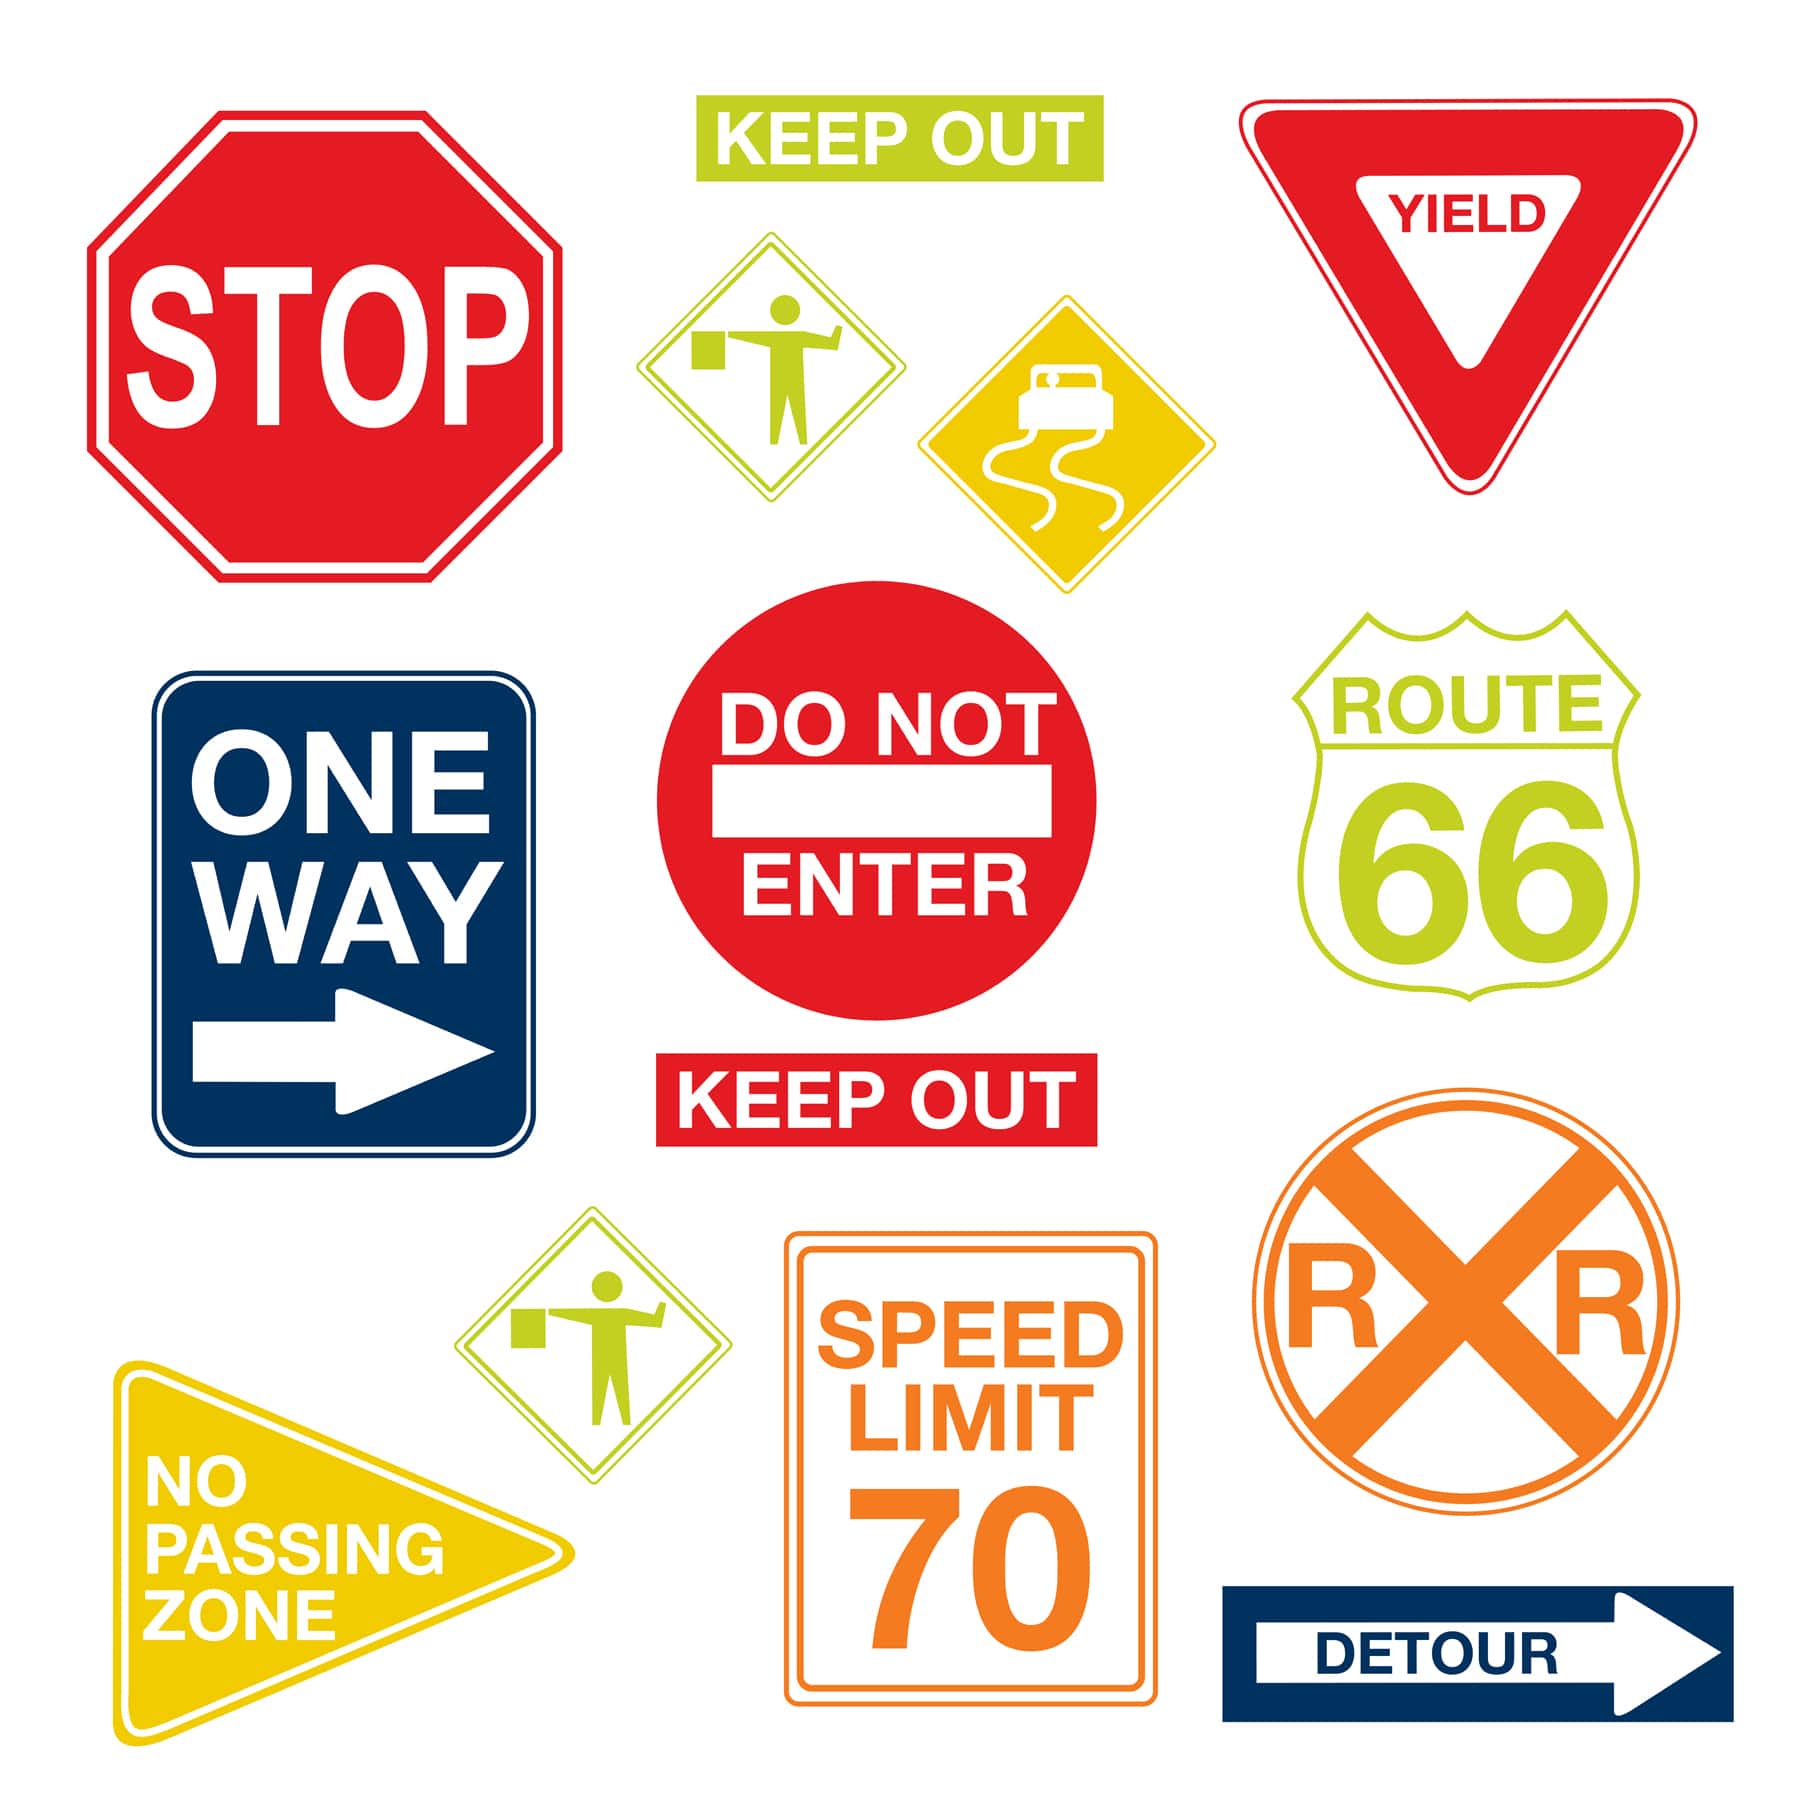 Kids Room Decor Vehicle Warning Road Sign Stickers 6 Road Sign Wall Stickers 